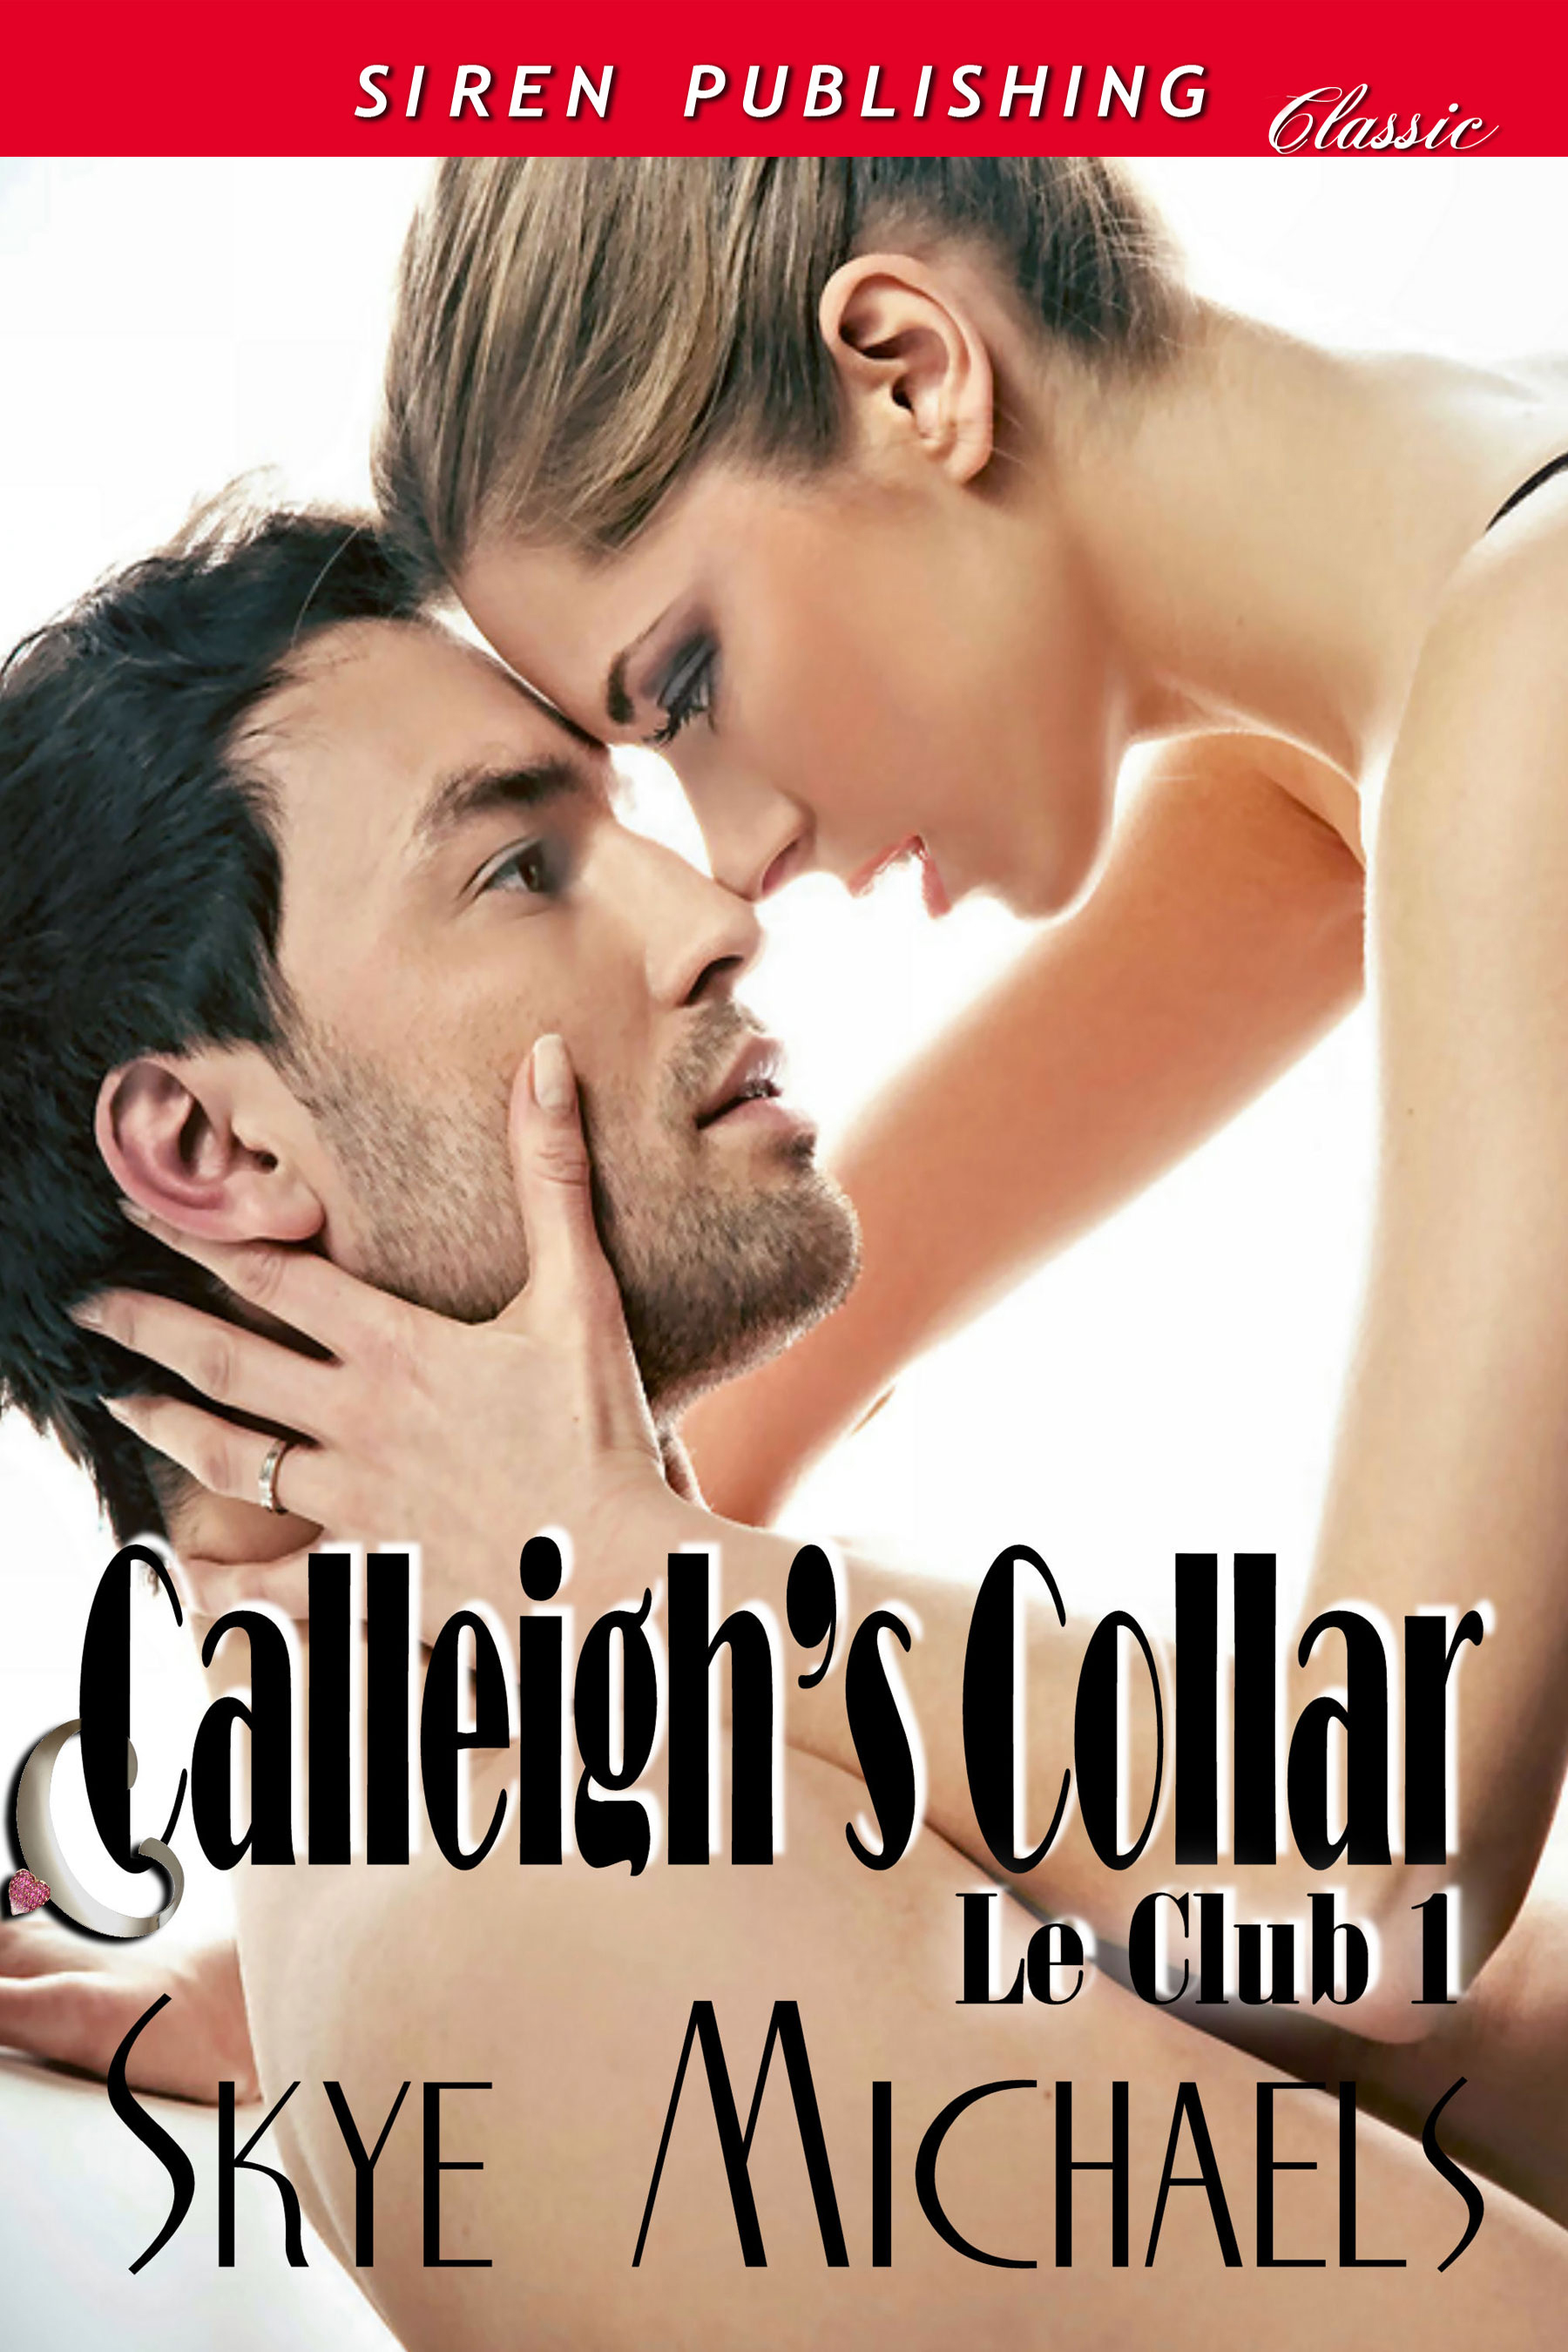 Cover Picture skm-lc-calleigh-full (2)